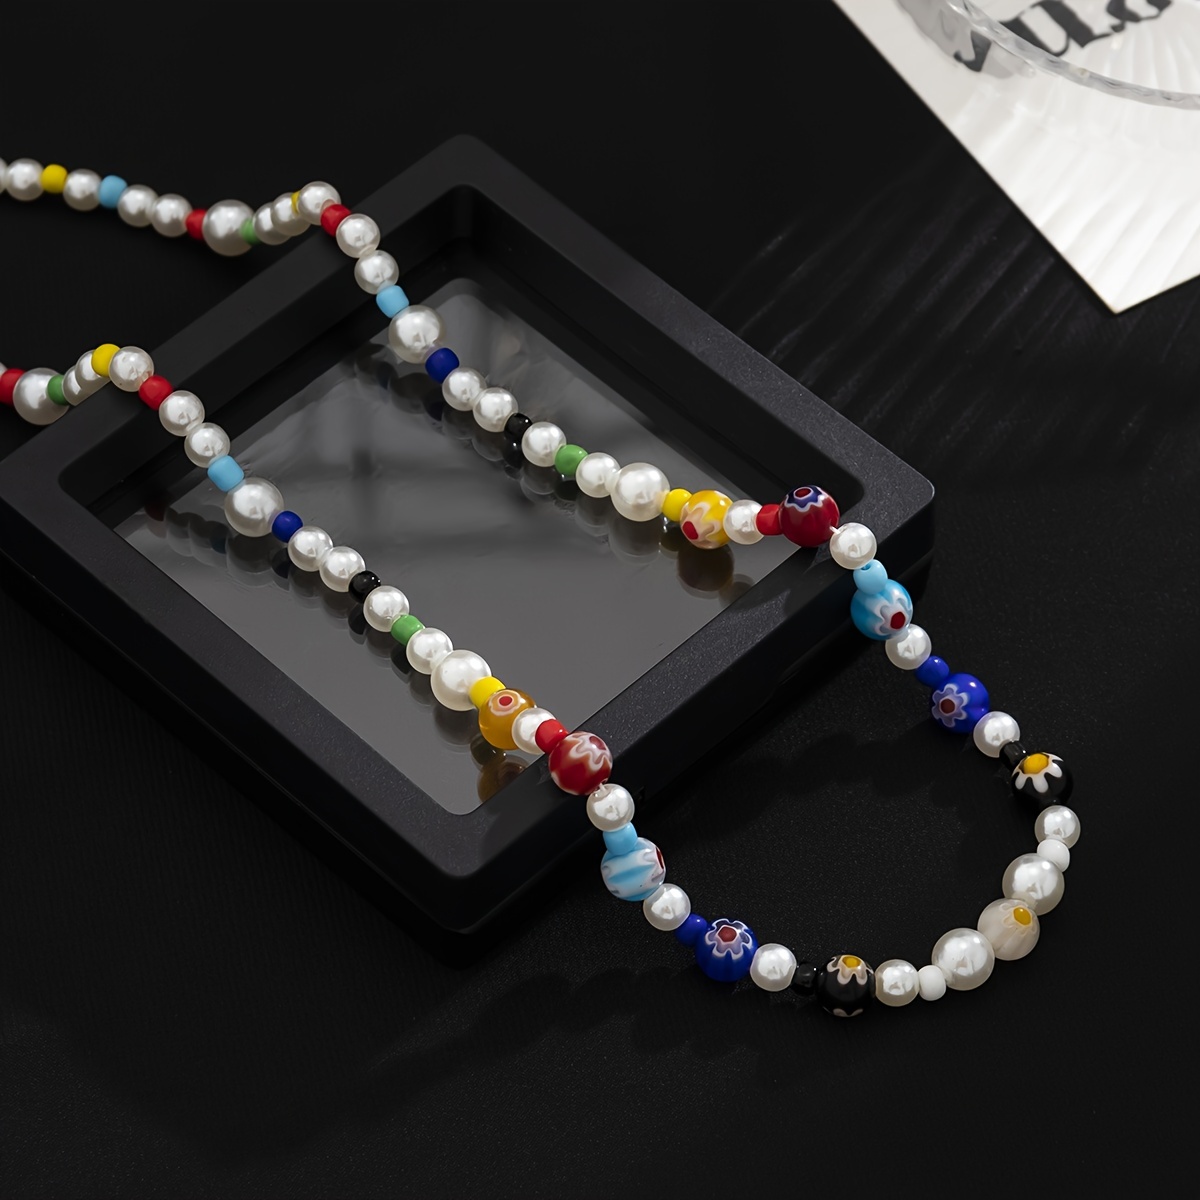 Colourful Beads And Pearl Necklace